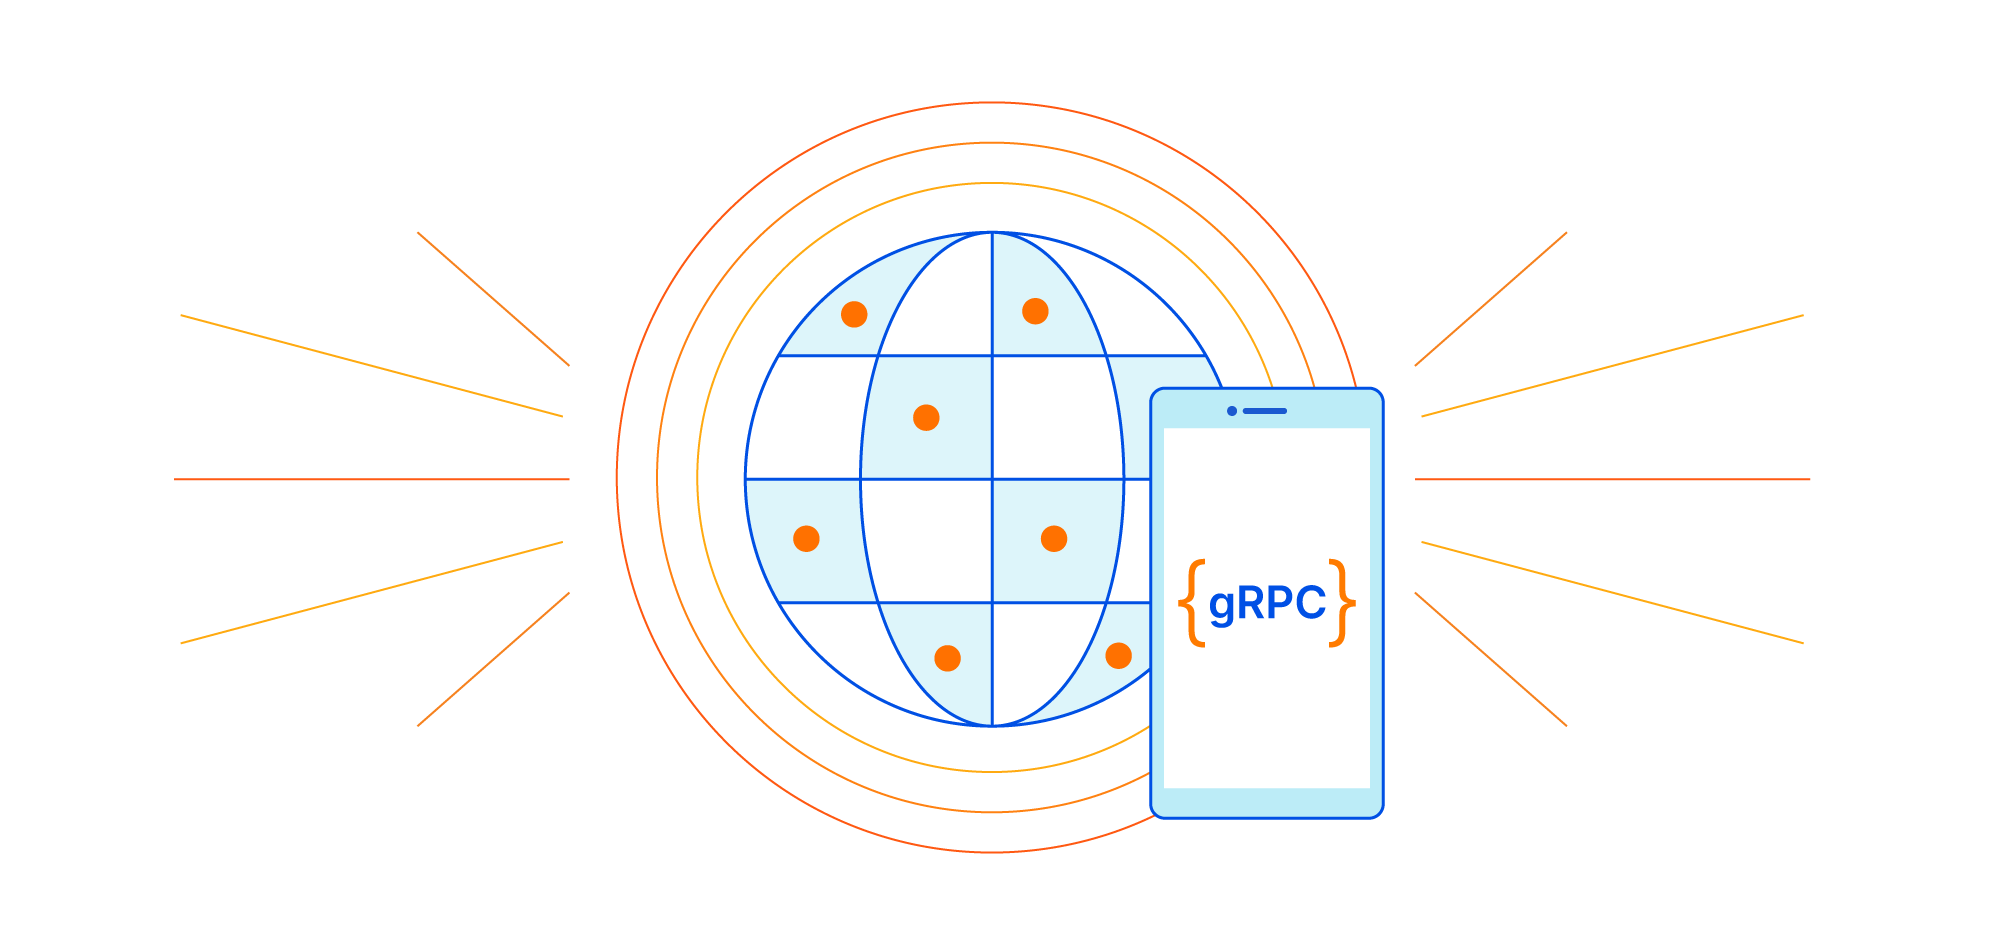 Road to gRPC